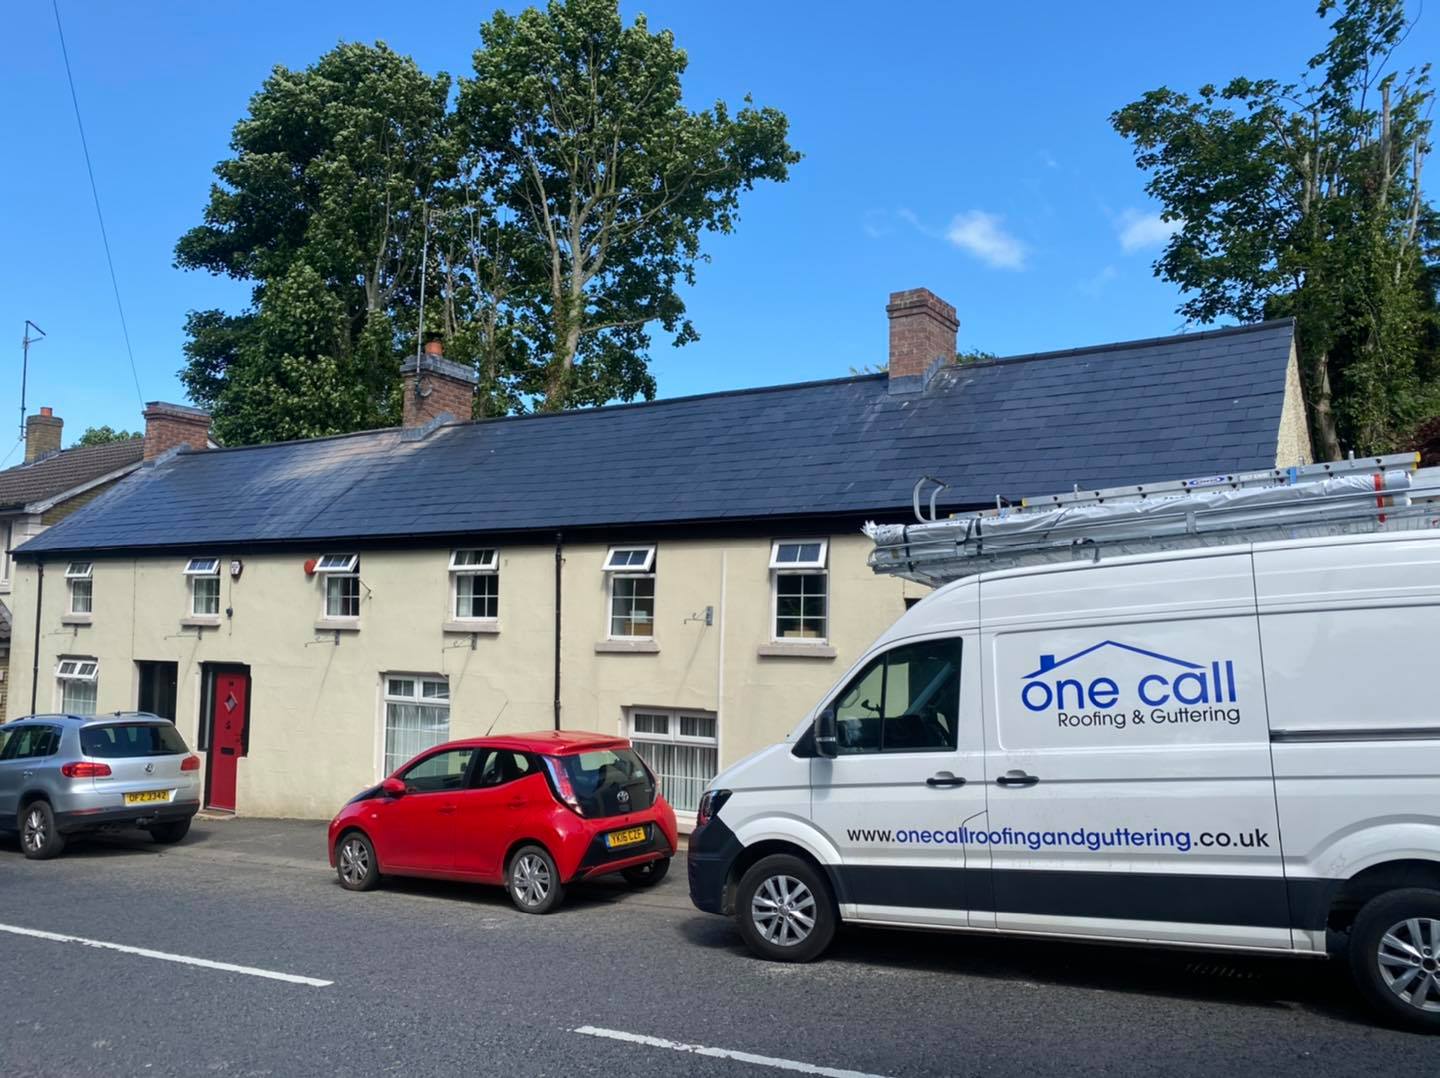 One Call Roofing & Guttering Van outside row of houses